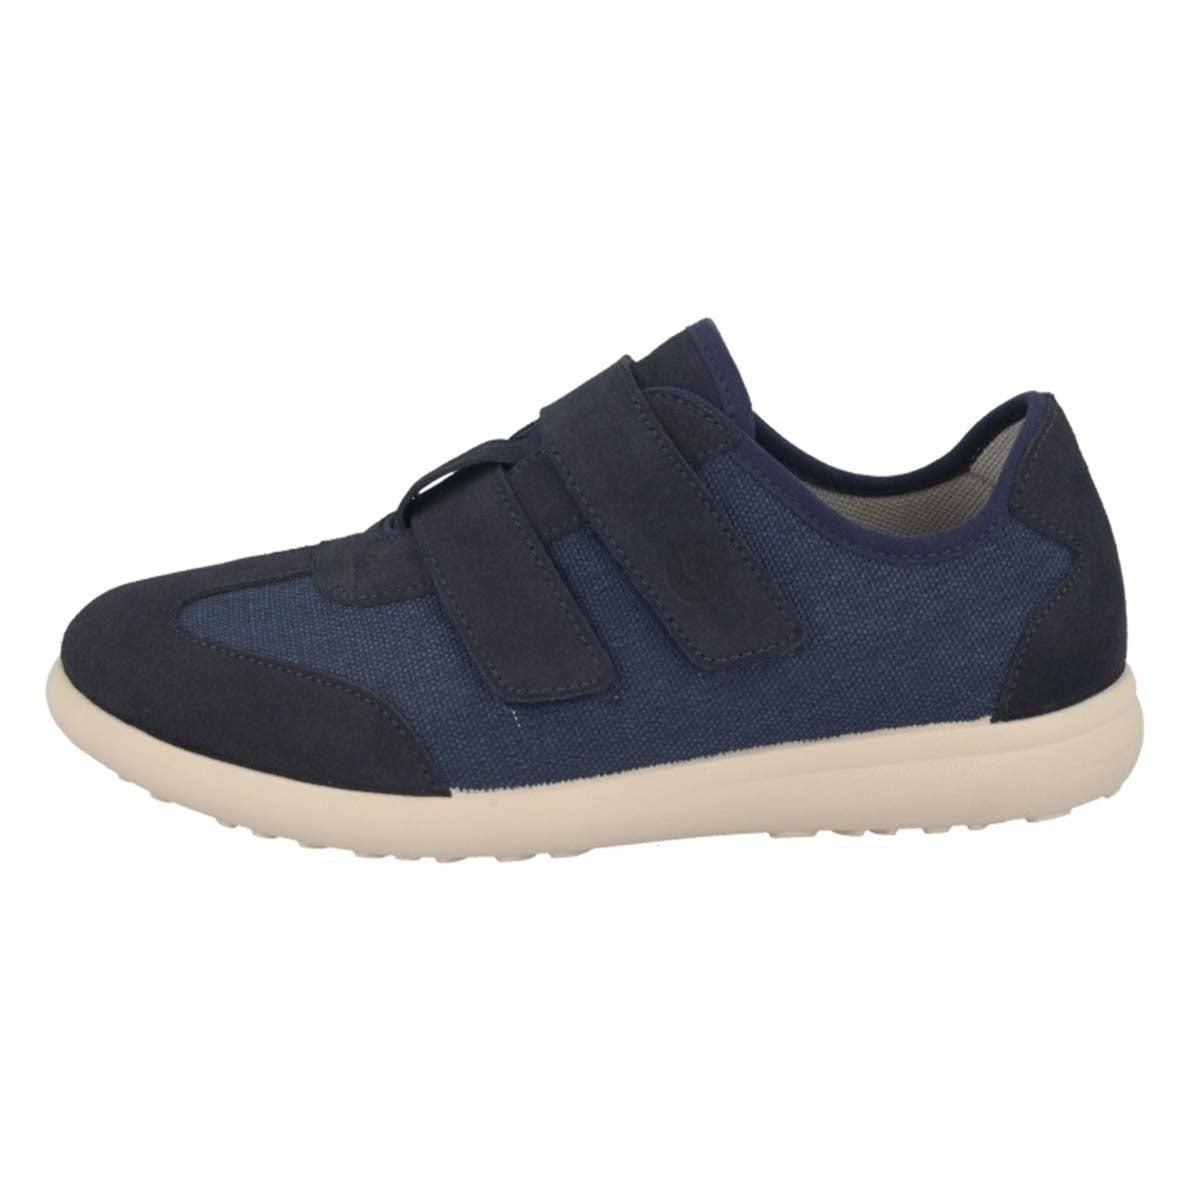 See the Blue Velcro Double Cloth Strap Sneakers Men Shoes in the colour BLUE, available in various sizes